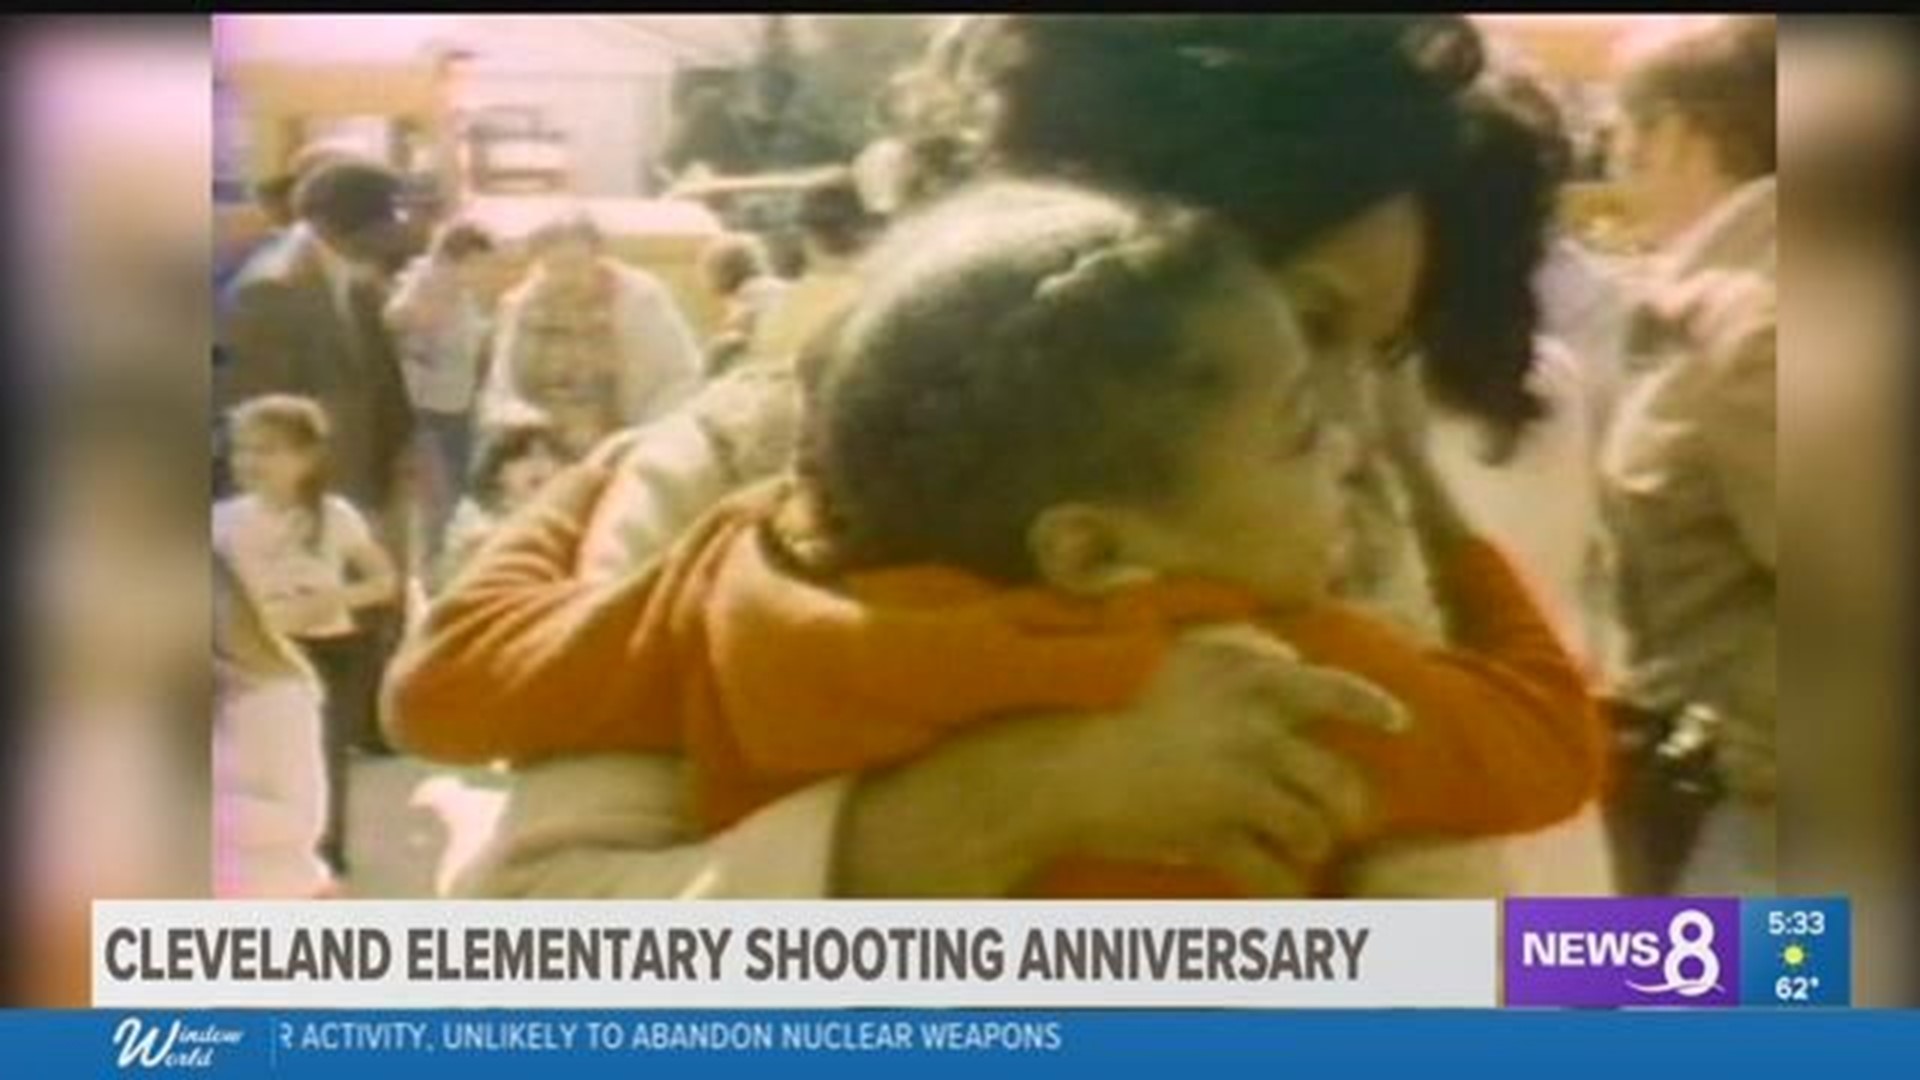 40th anniversary of Cleveland Elementary School shooting